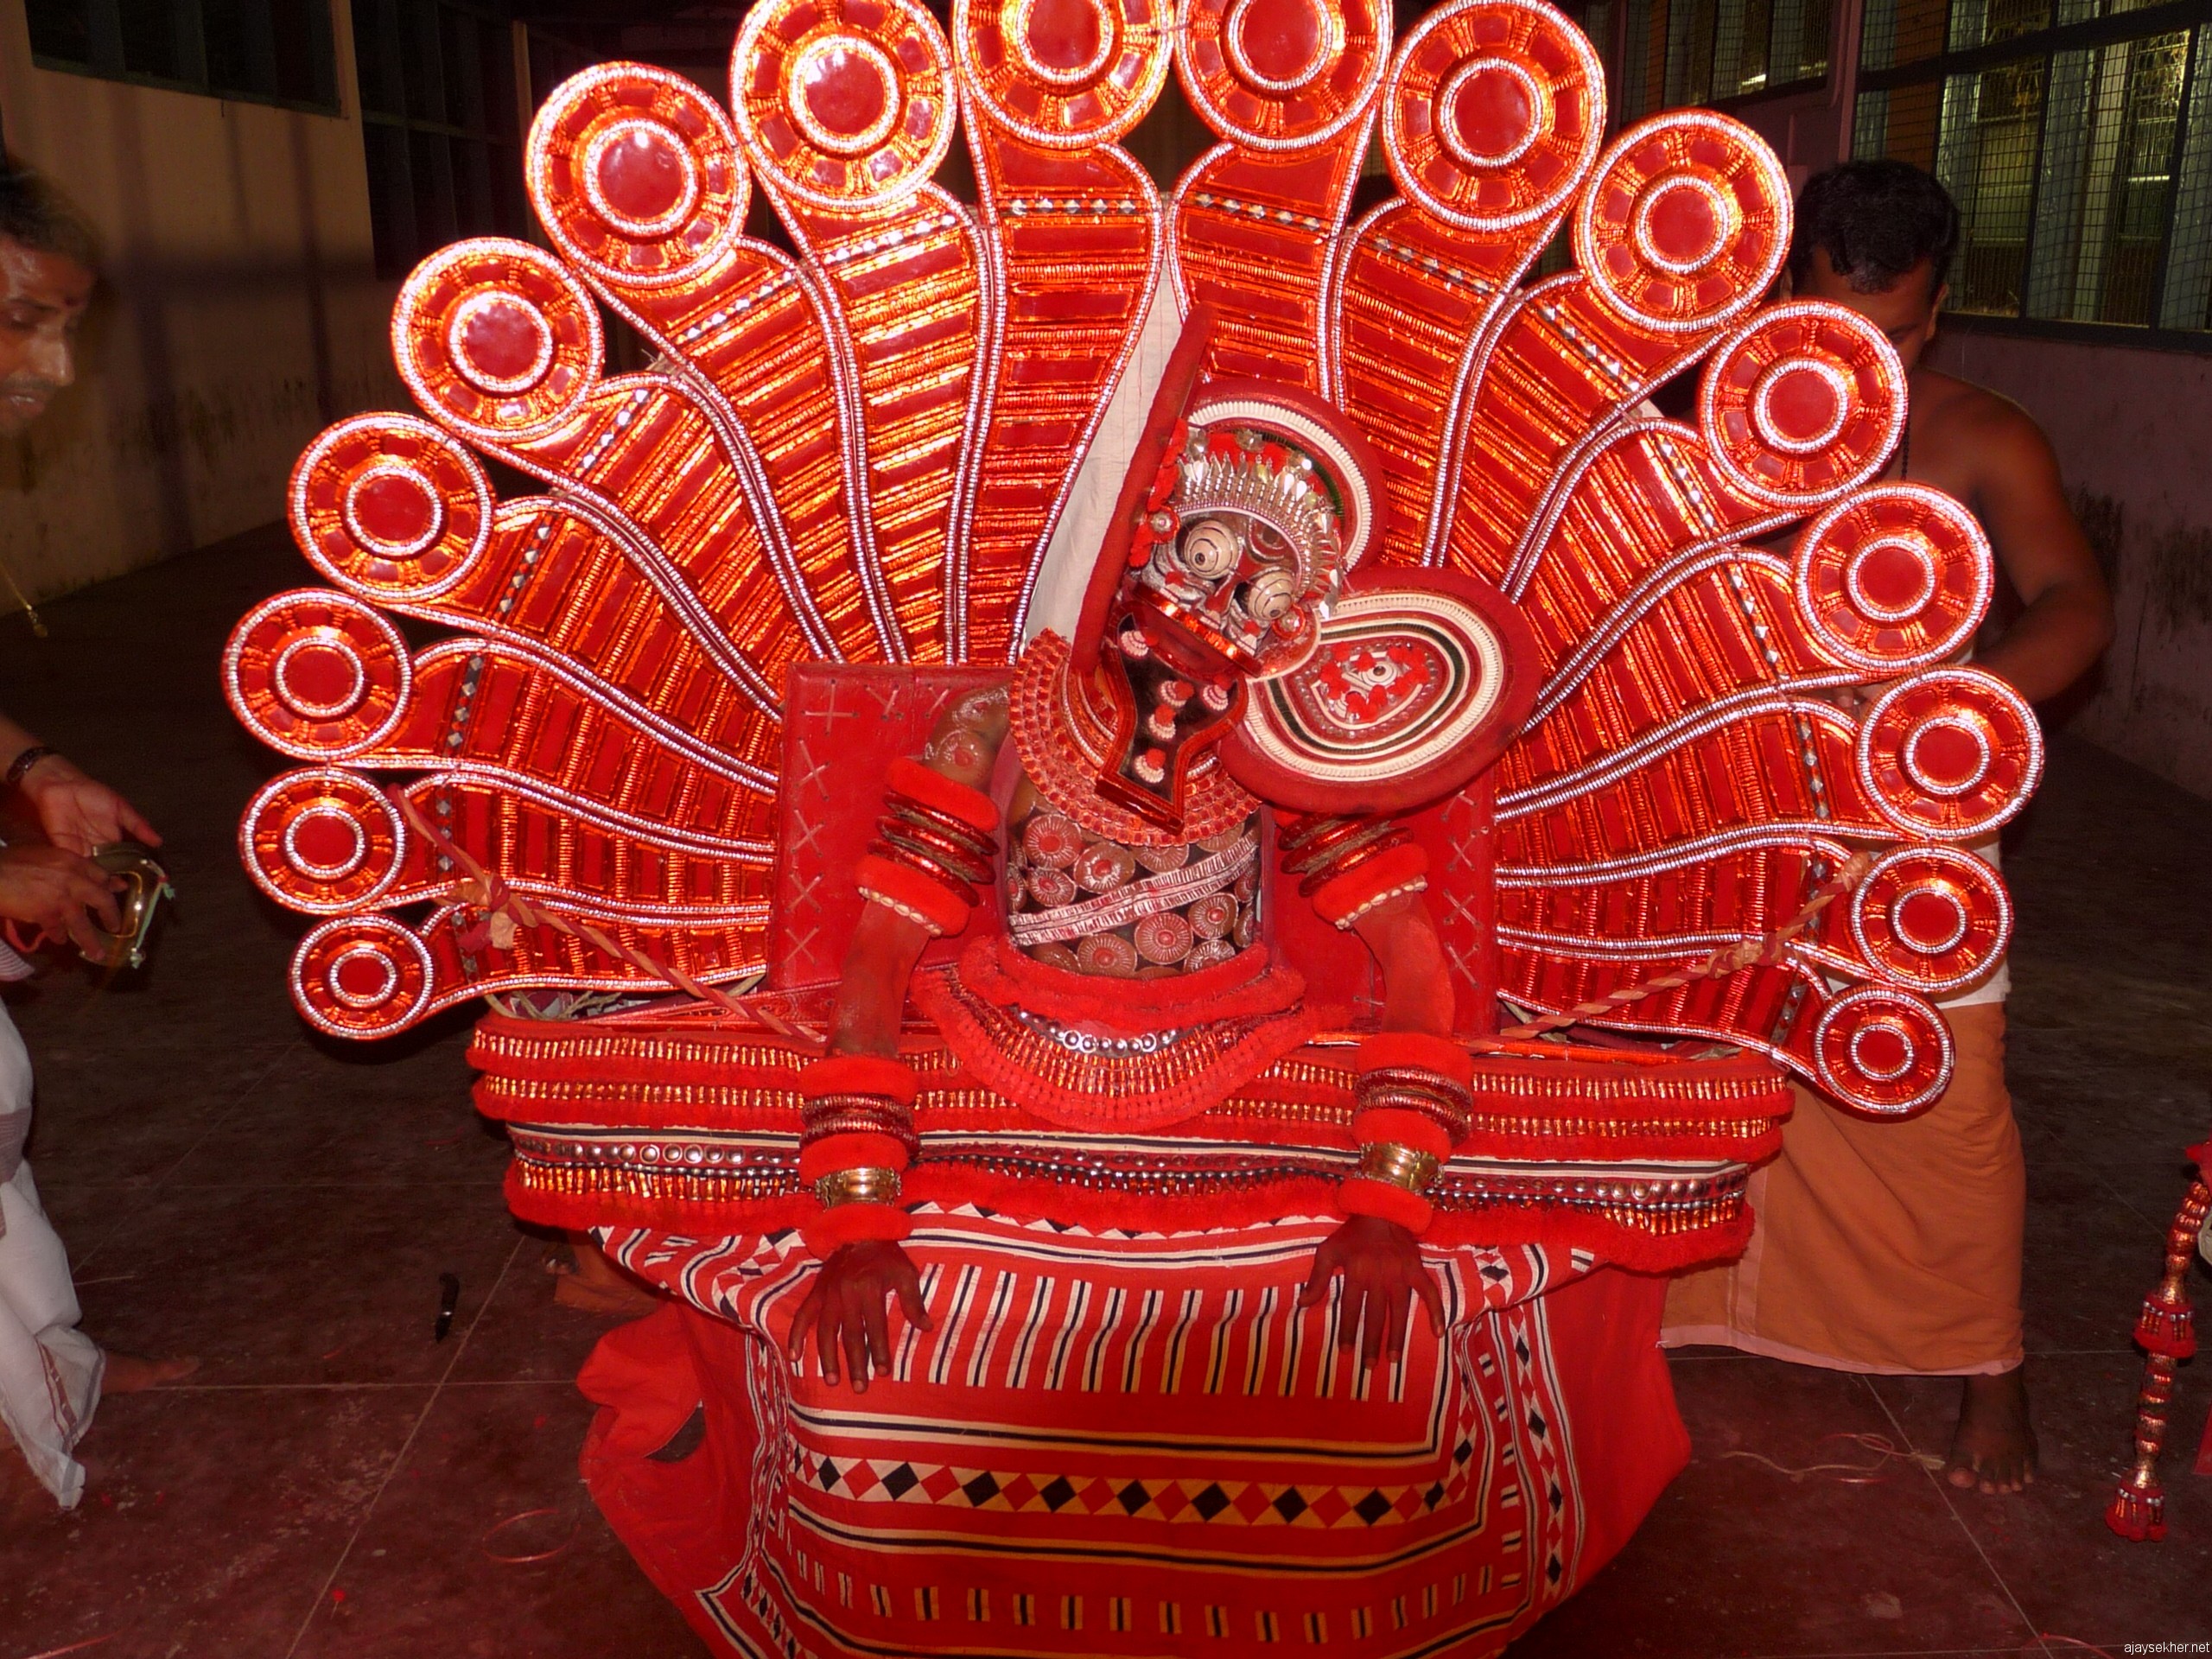 A Kutty Chathan (little Sastha or boddhisatva) Theyyam being performed in National Theatre Fest 2011 at Calicut.